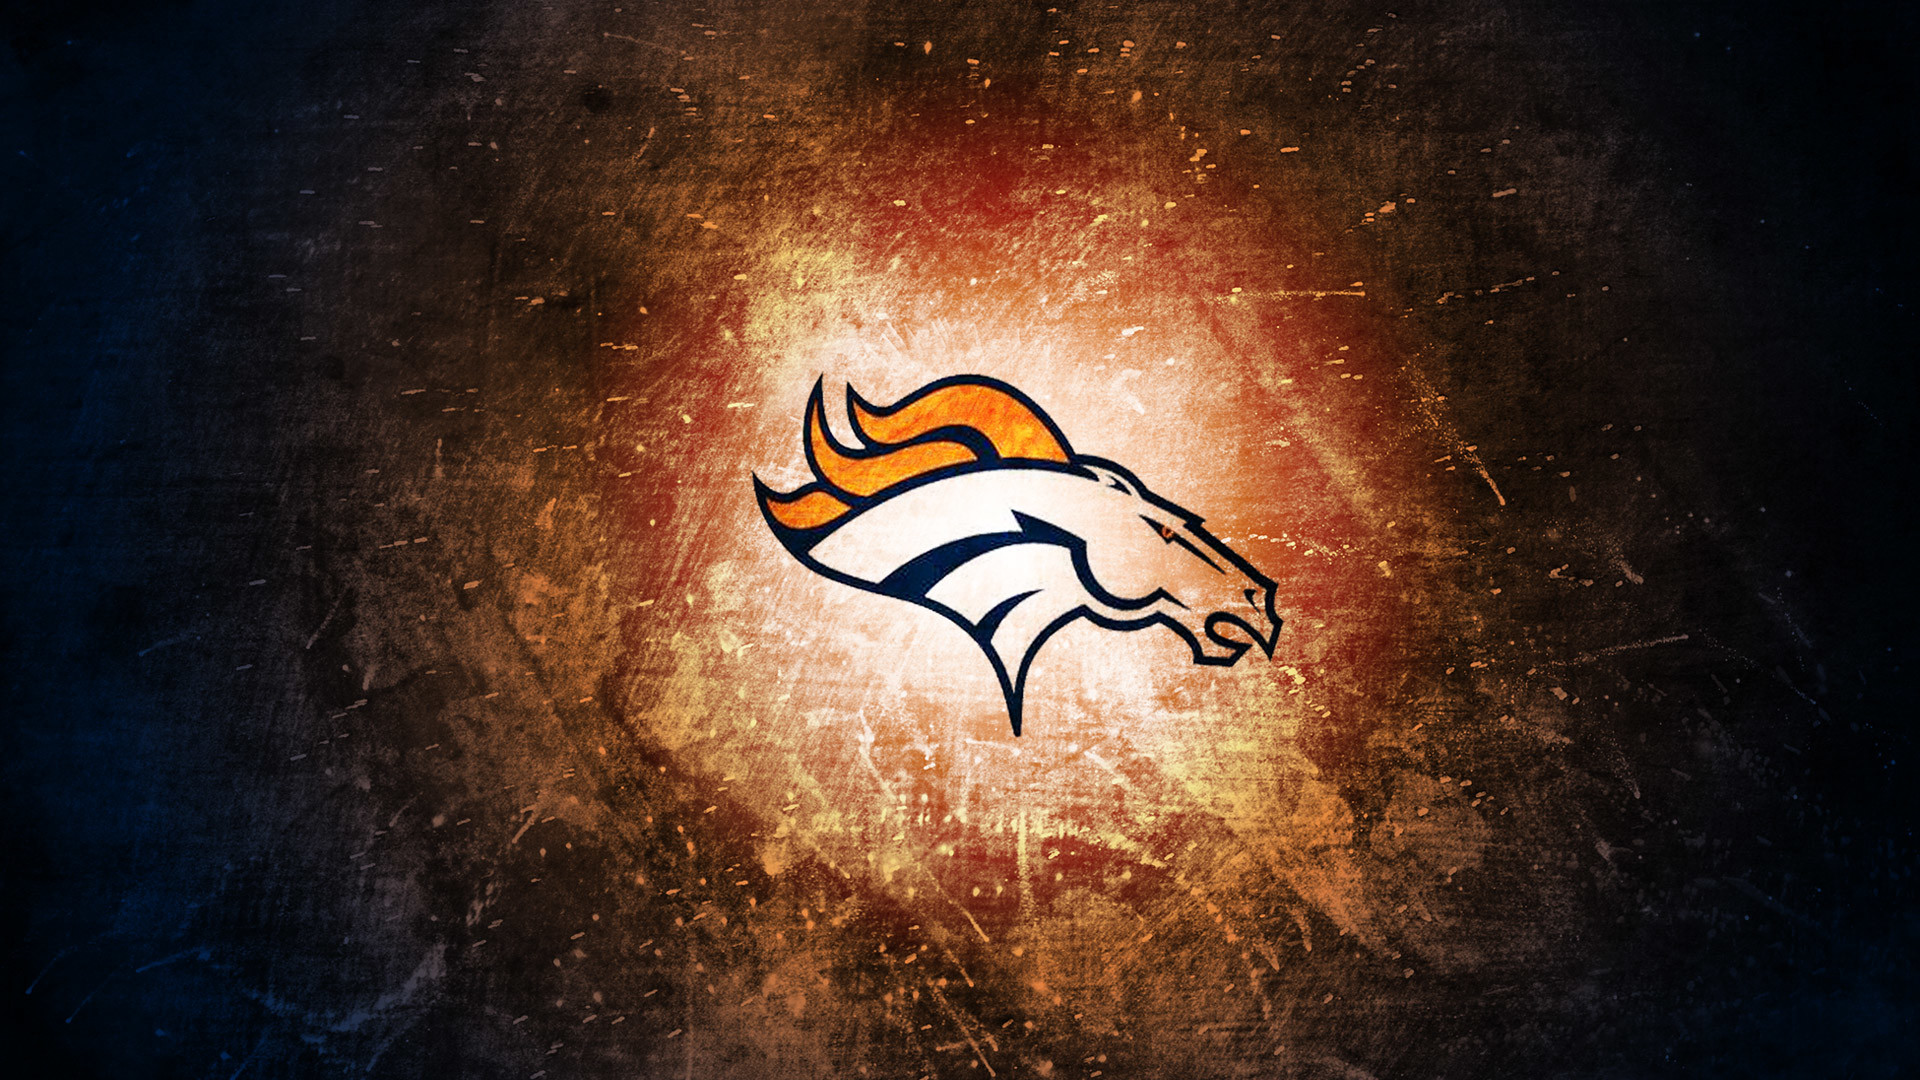 1920x1080 Denver Broncos Facebook Cover wallpapers HD free - 431541